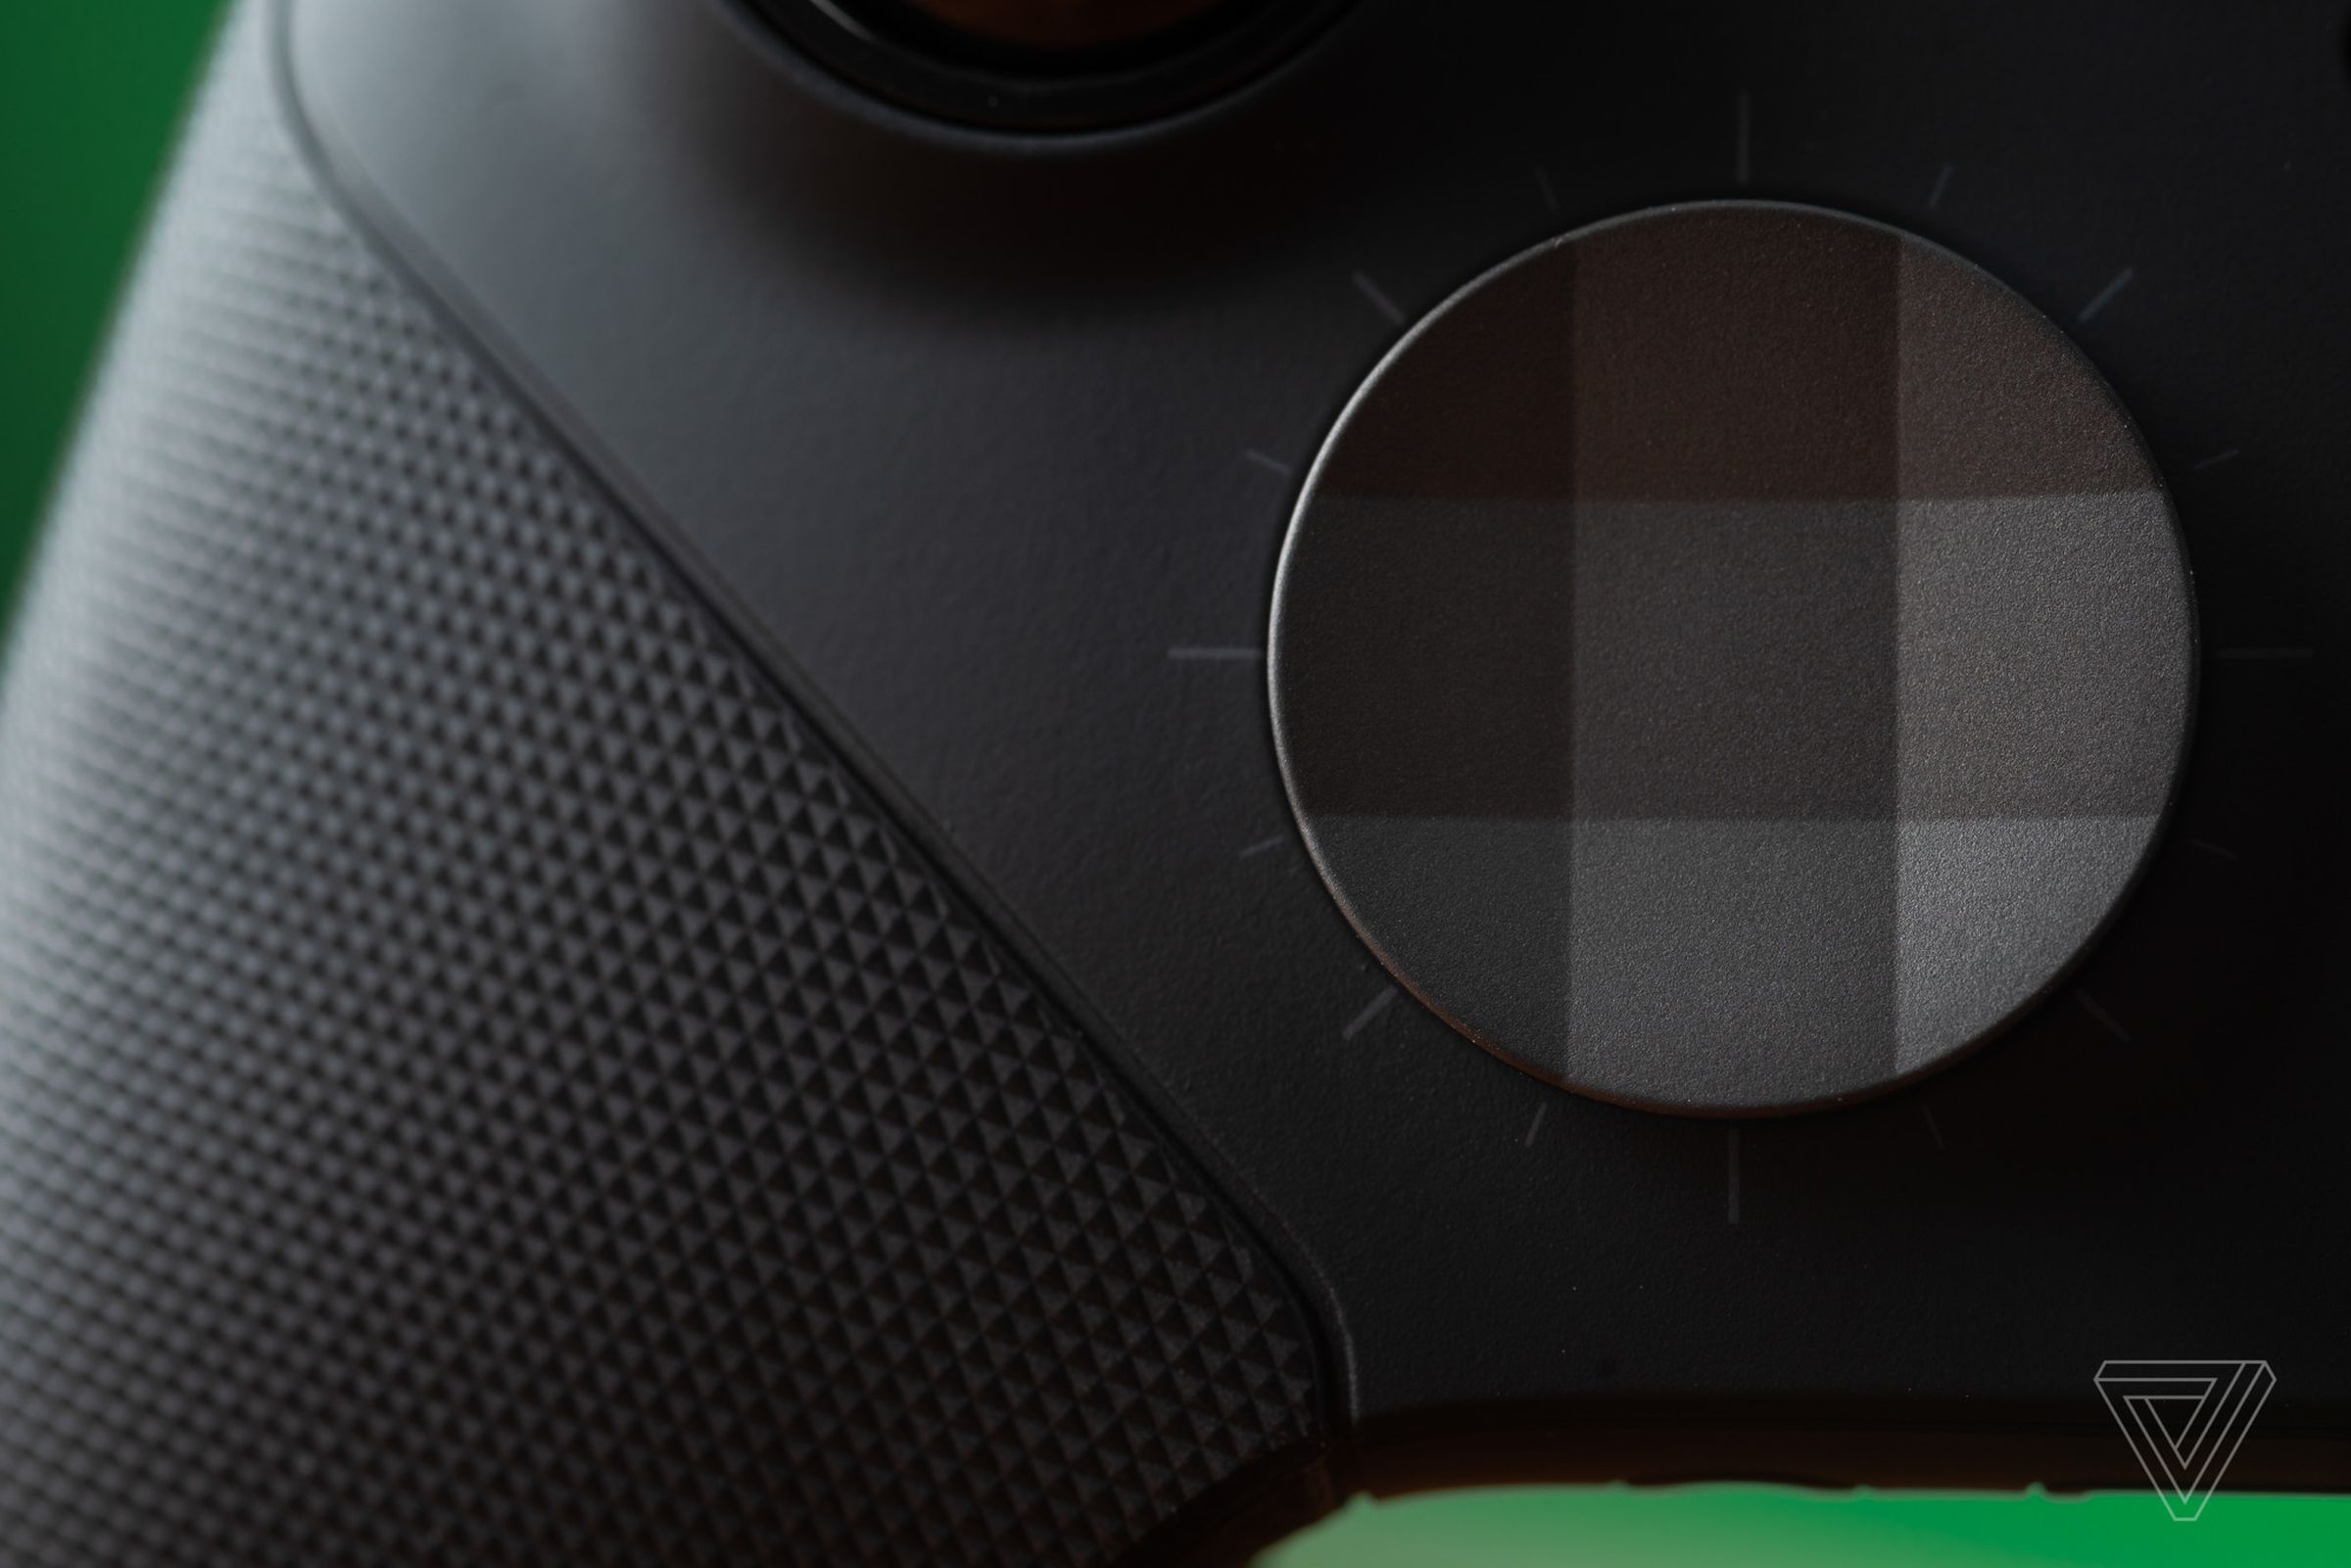 A macro closeup of the dish-shaped metal D-pad on the Xbox Elite Wireless Controller Series 2.